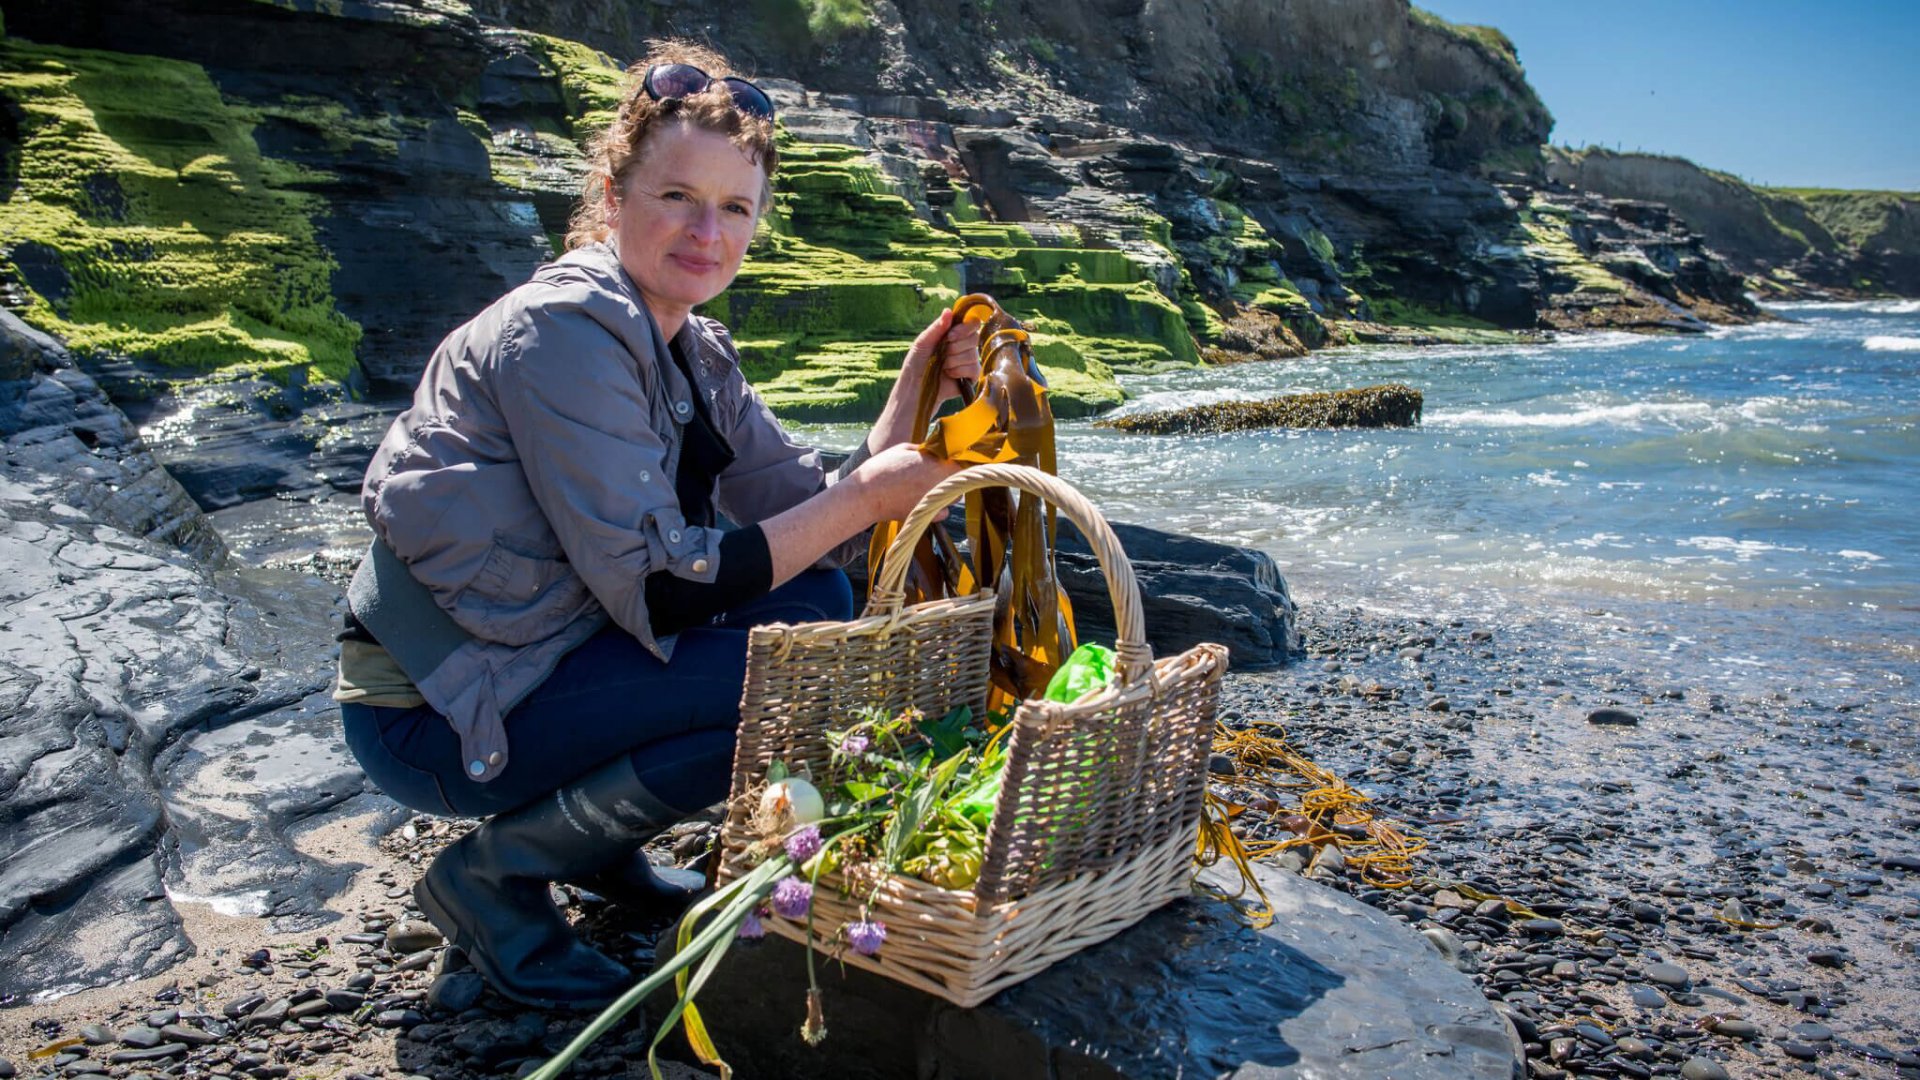 Seaweed forager Oonagh O'Dwyer on the coast of Clare in Ireland